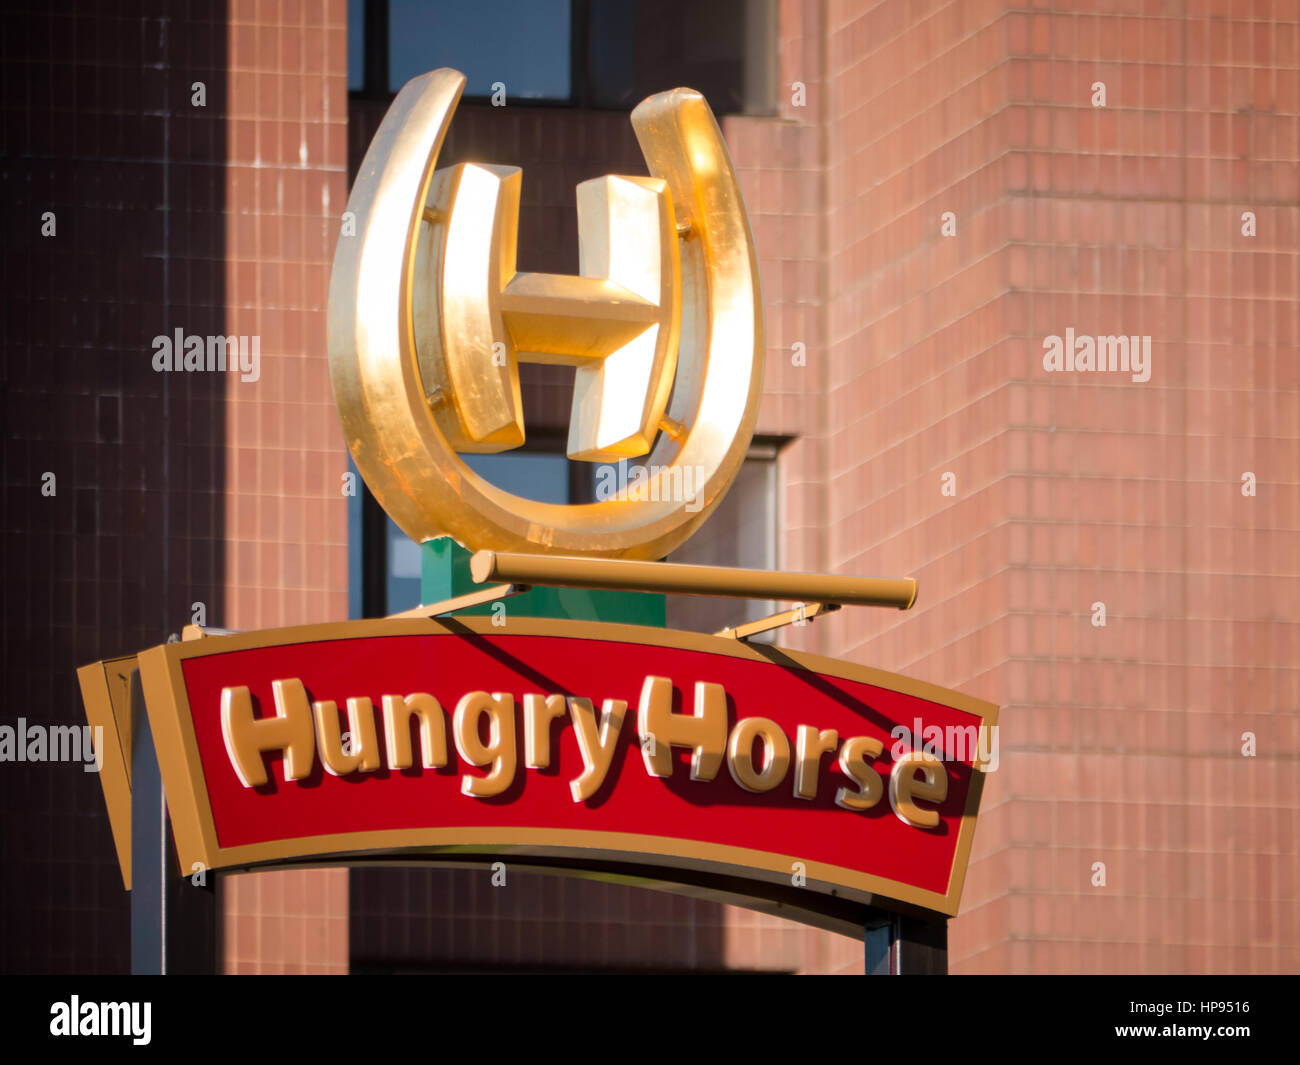 A sign and logo for a Hungry Horse restaurant, a part of the Greene King group Stock Photo